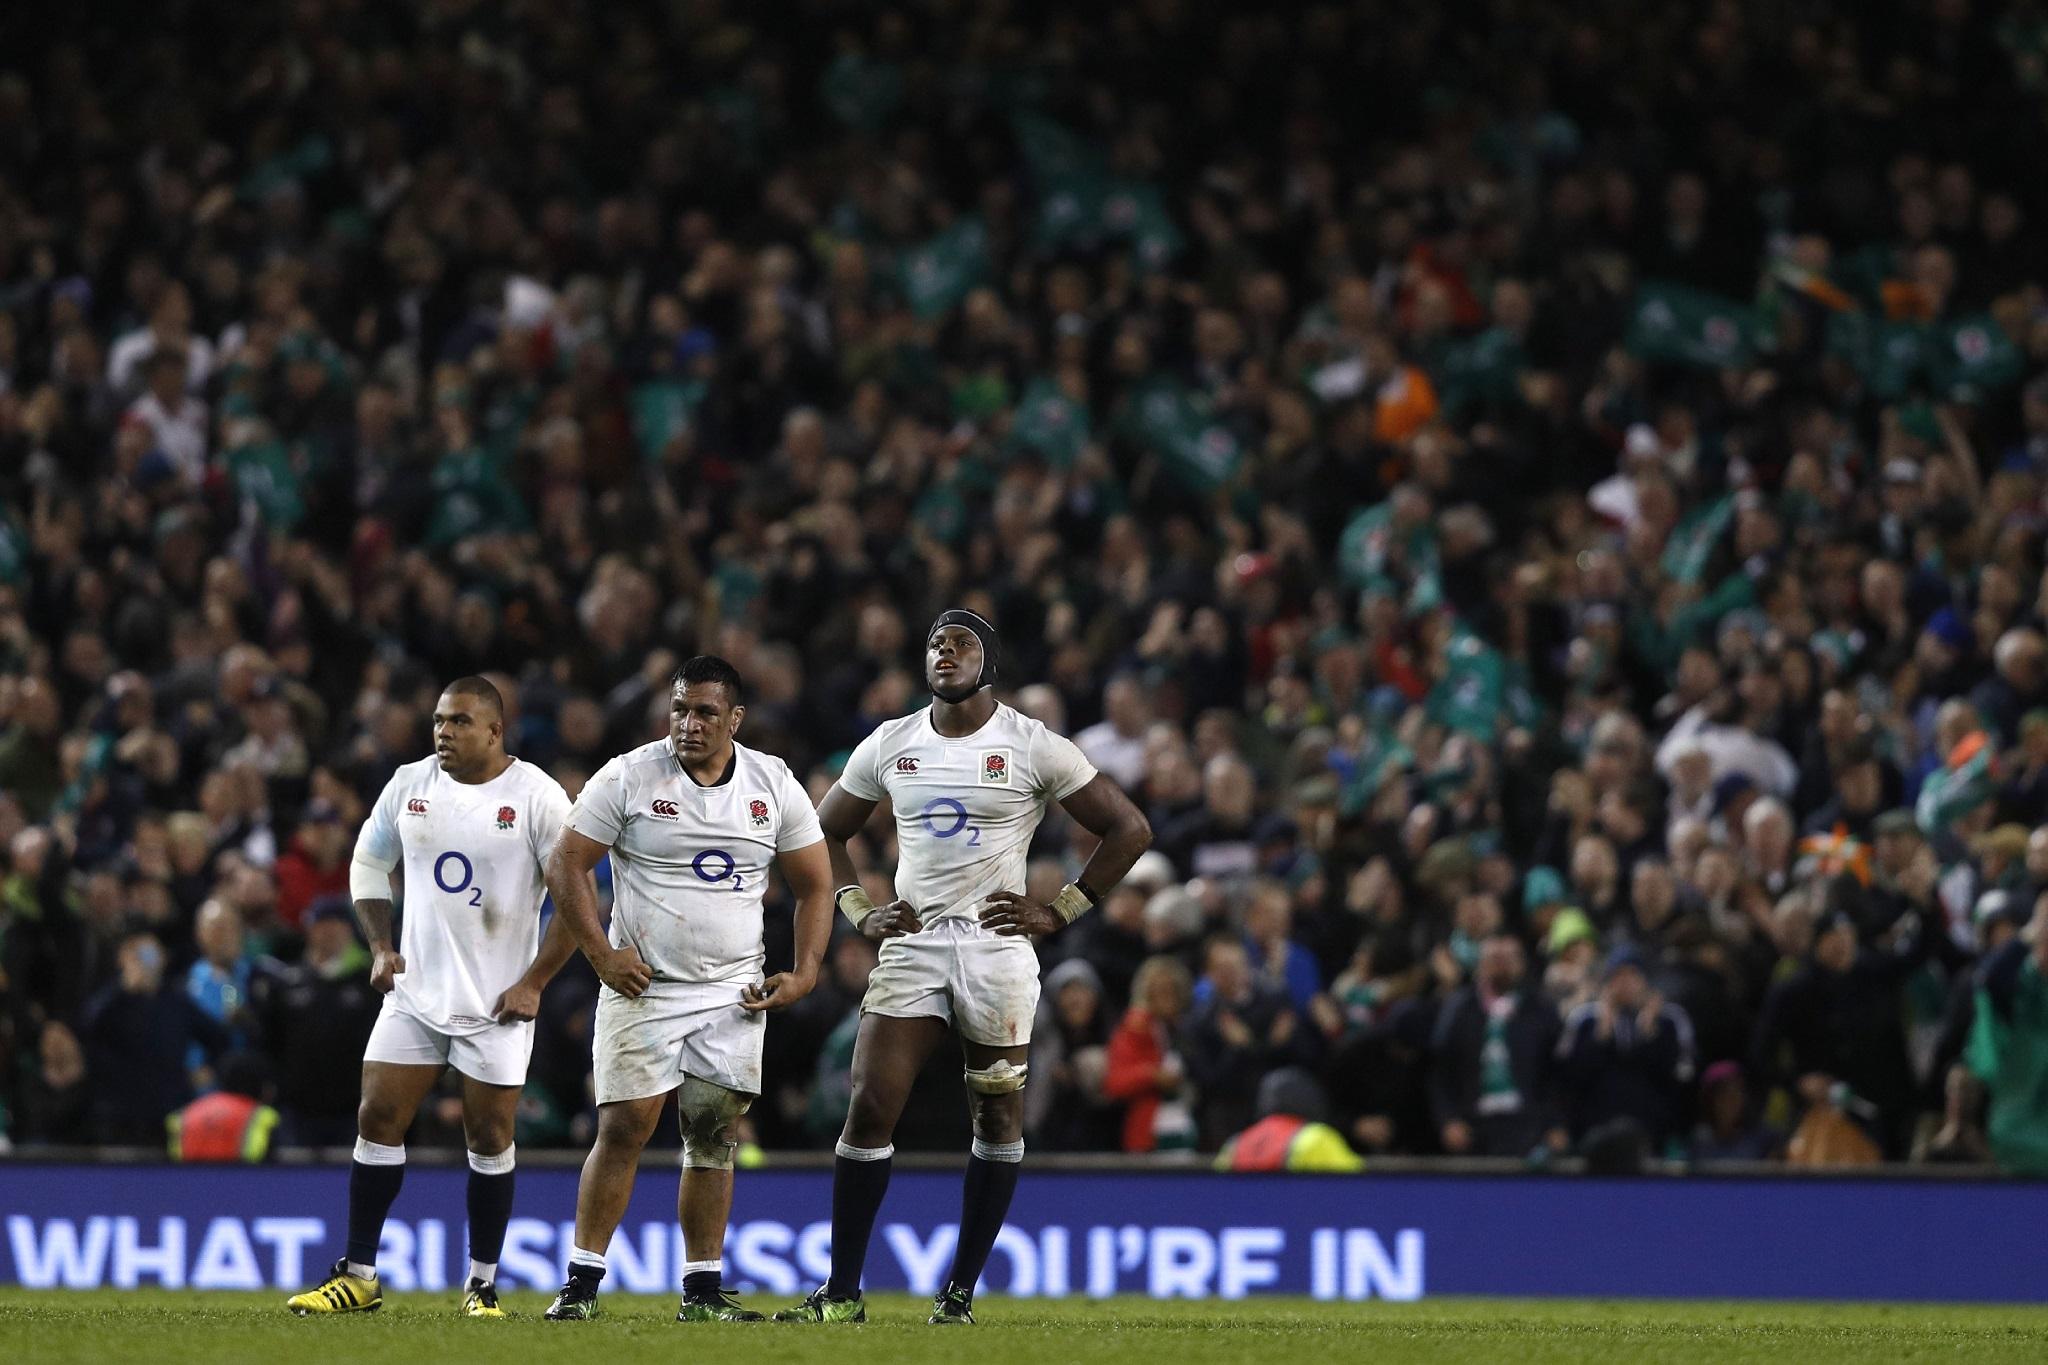 Kyle Sinckler, Mako Vunipola and Maro Itoje look on dejected after defeat by Ireland